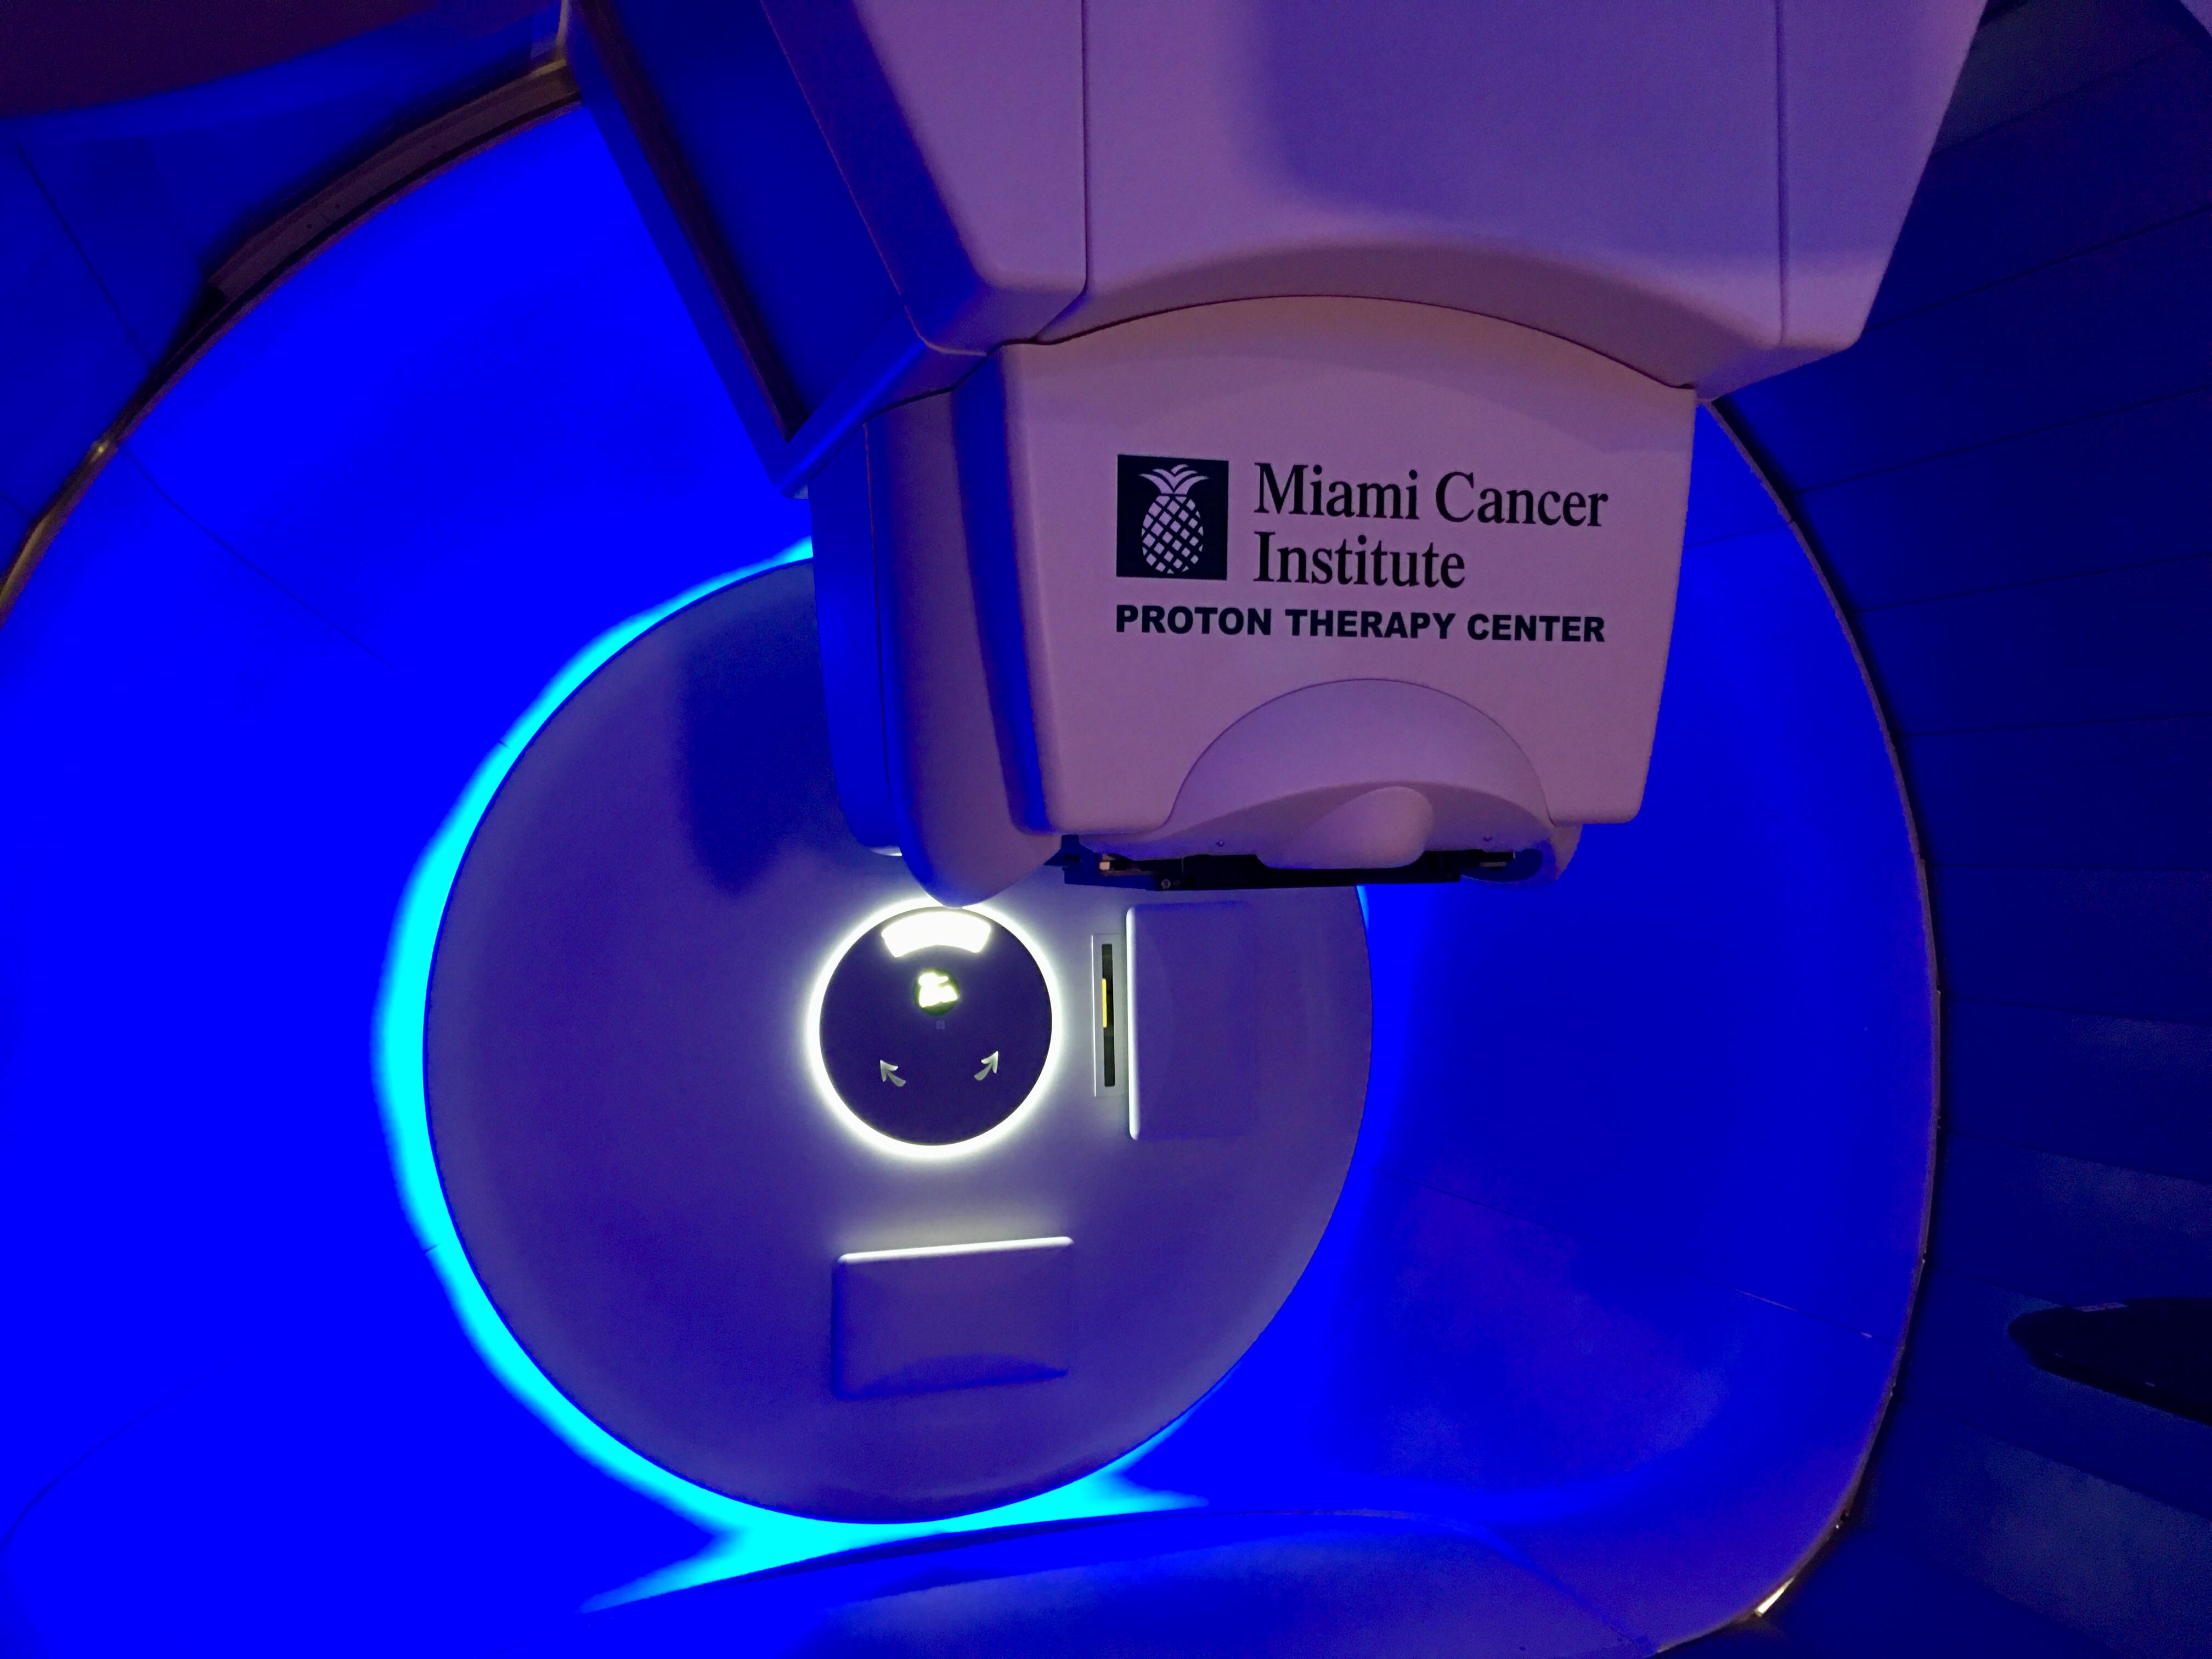 Miami Cancer Institute’s Proton Therapy Center is the first in South Florida and the region’s top destination for this leading-edge treatment. Proton therapy is an advanced form of radiation therapy that uses pencil beam scanning (PBS) technology.